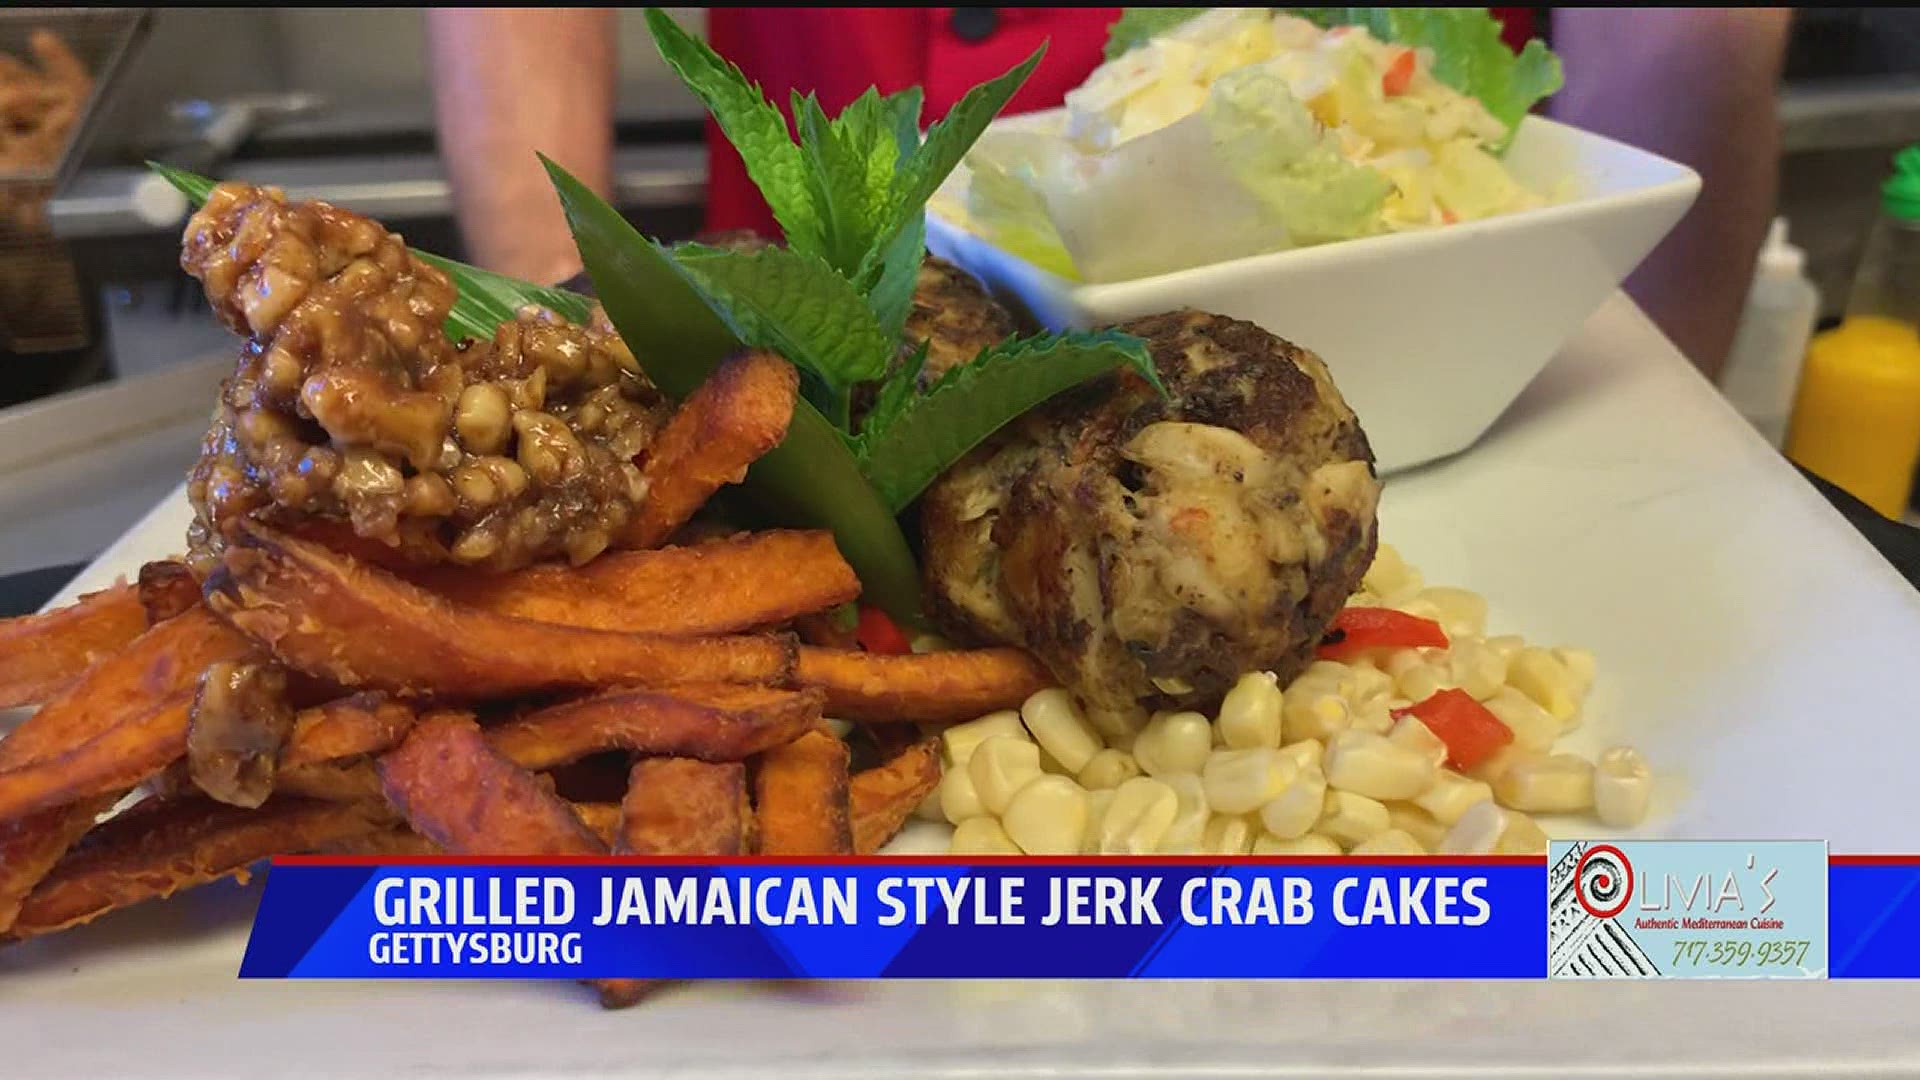 Olivia's Prepares Grilled Jamaican Style Jerk Crab Cakes, Olivia's is open for outdoor seating and dining